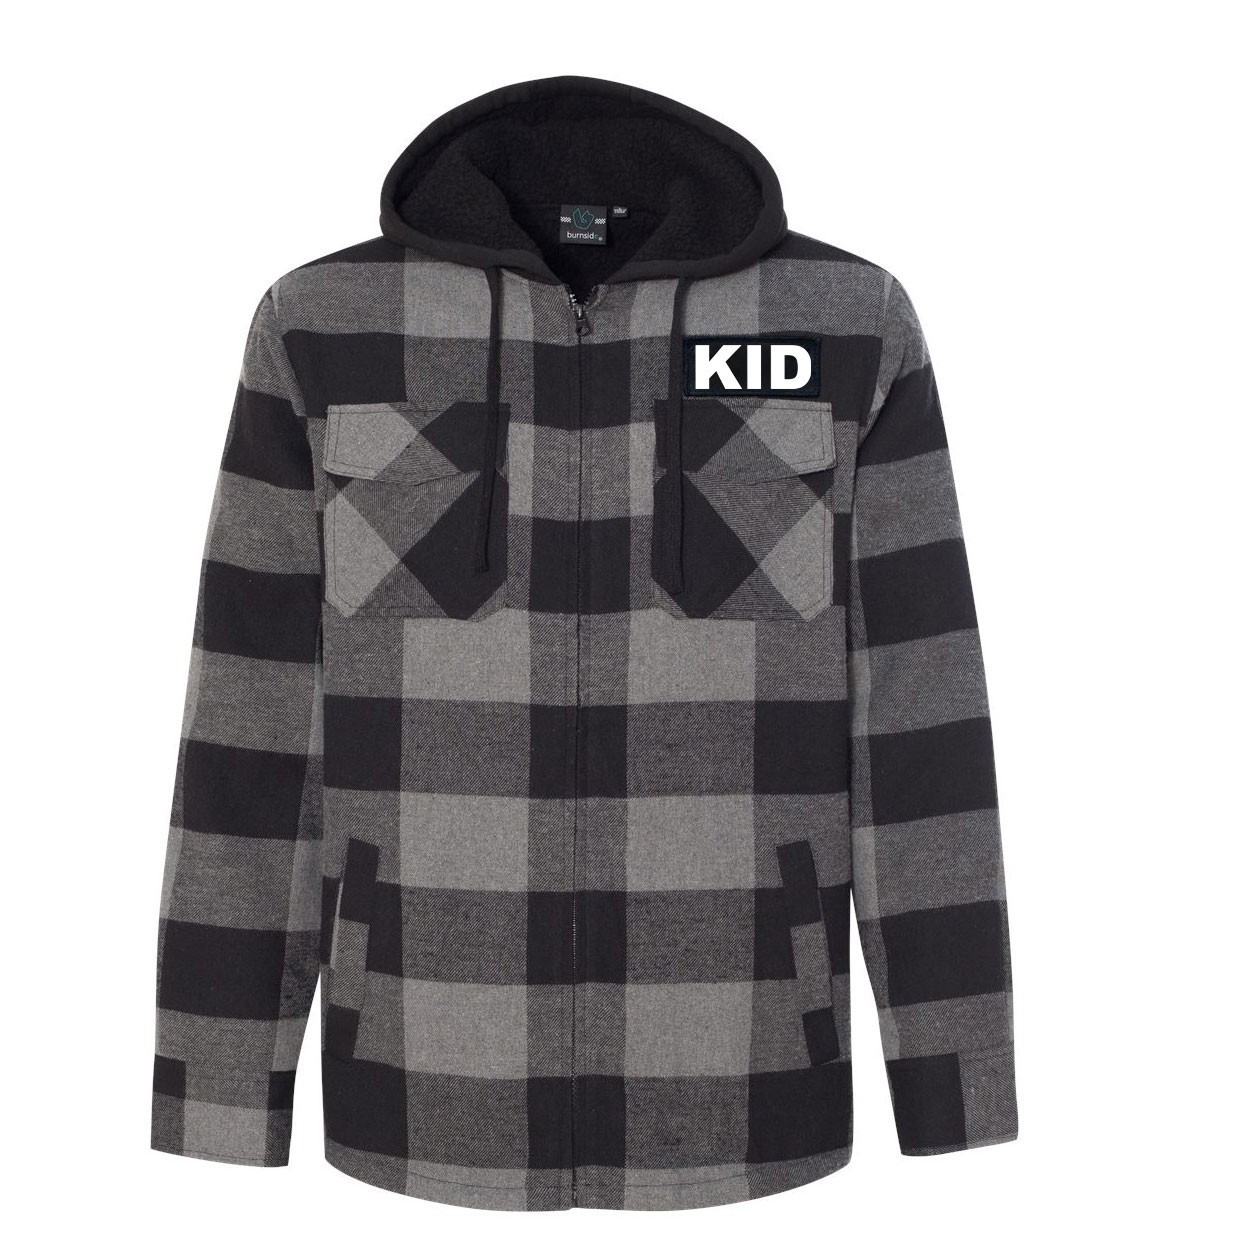 Kid Brand Logo Classic Unisex Full Zip Woven Patch Hooded Flannel Jacket Black/Gray